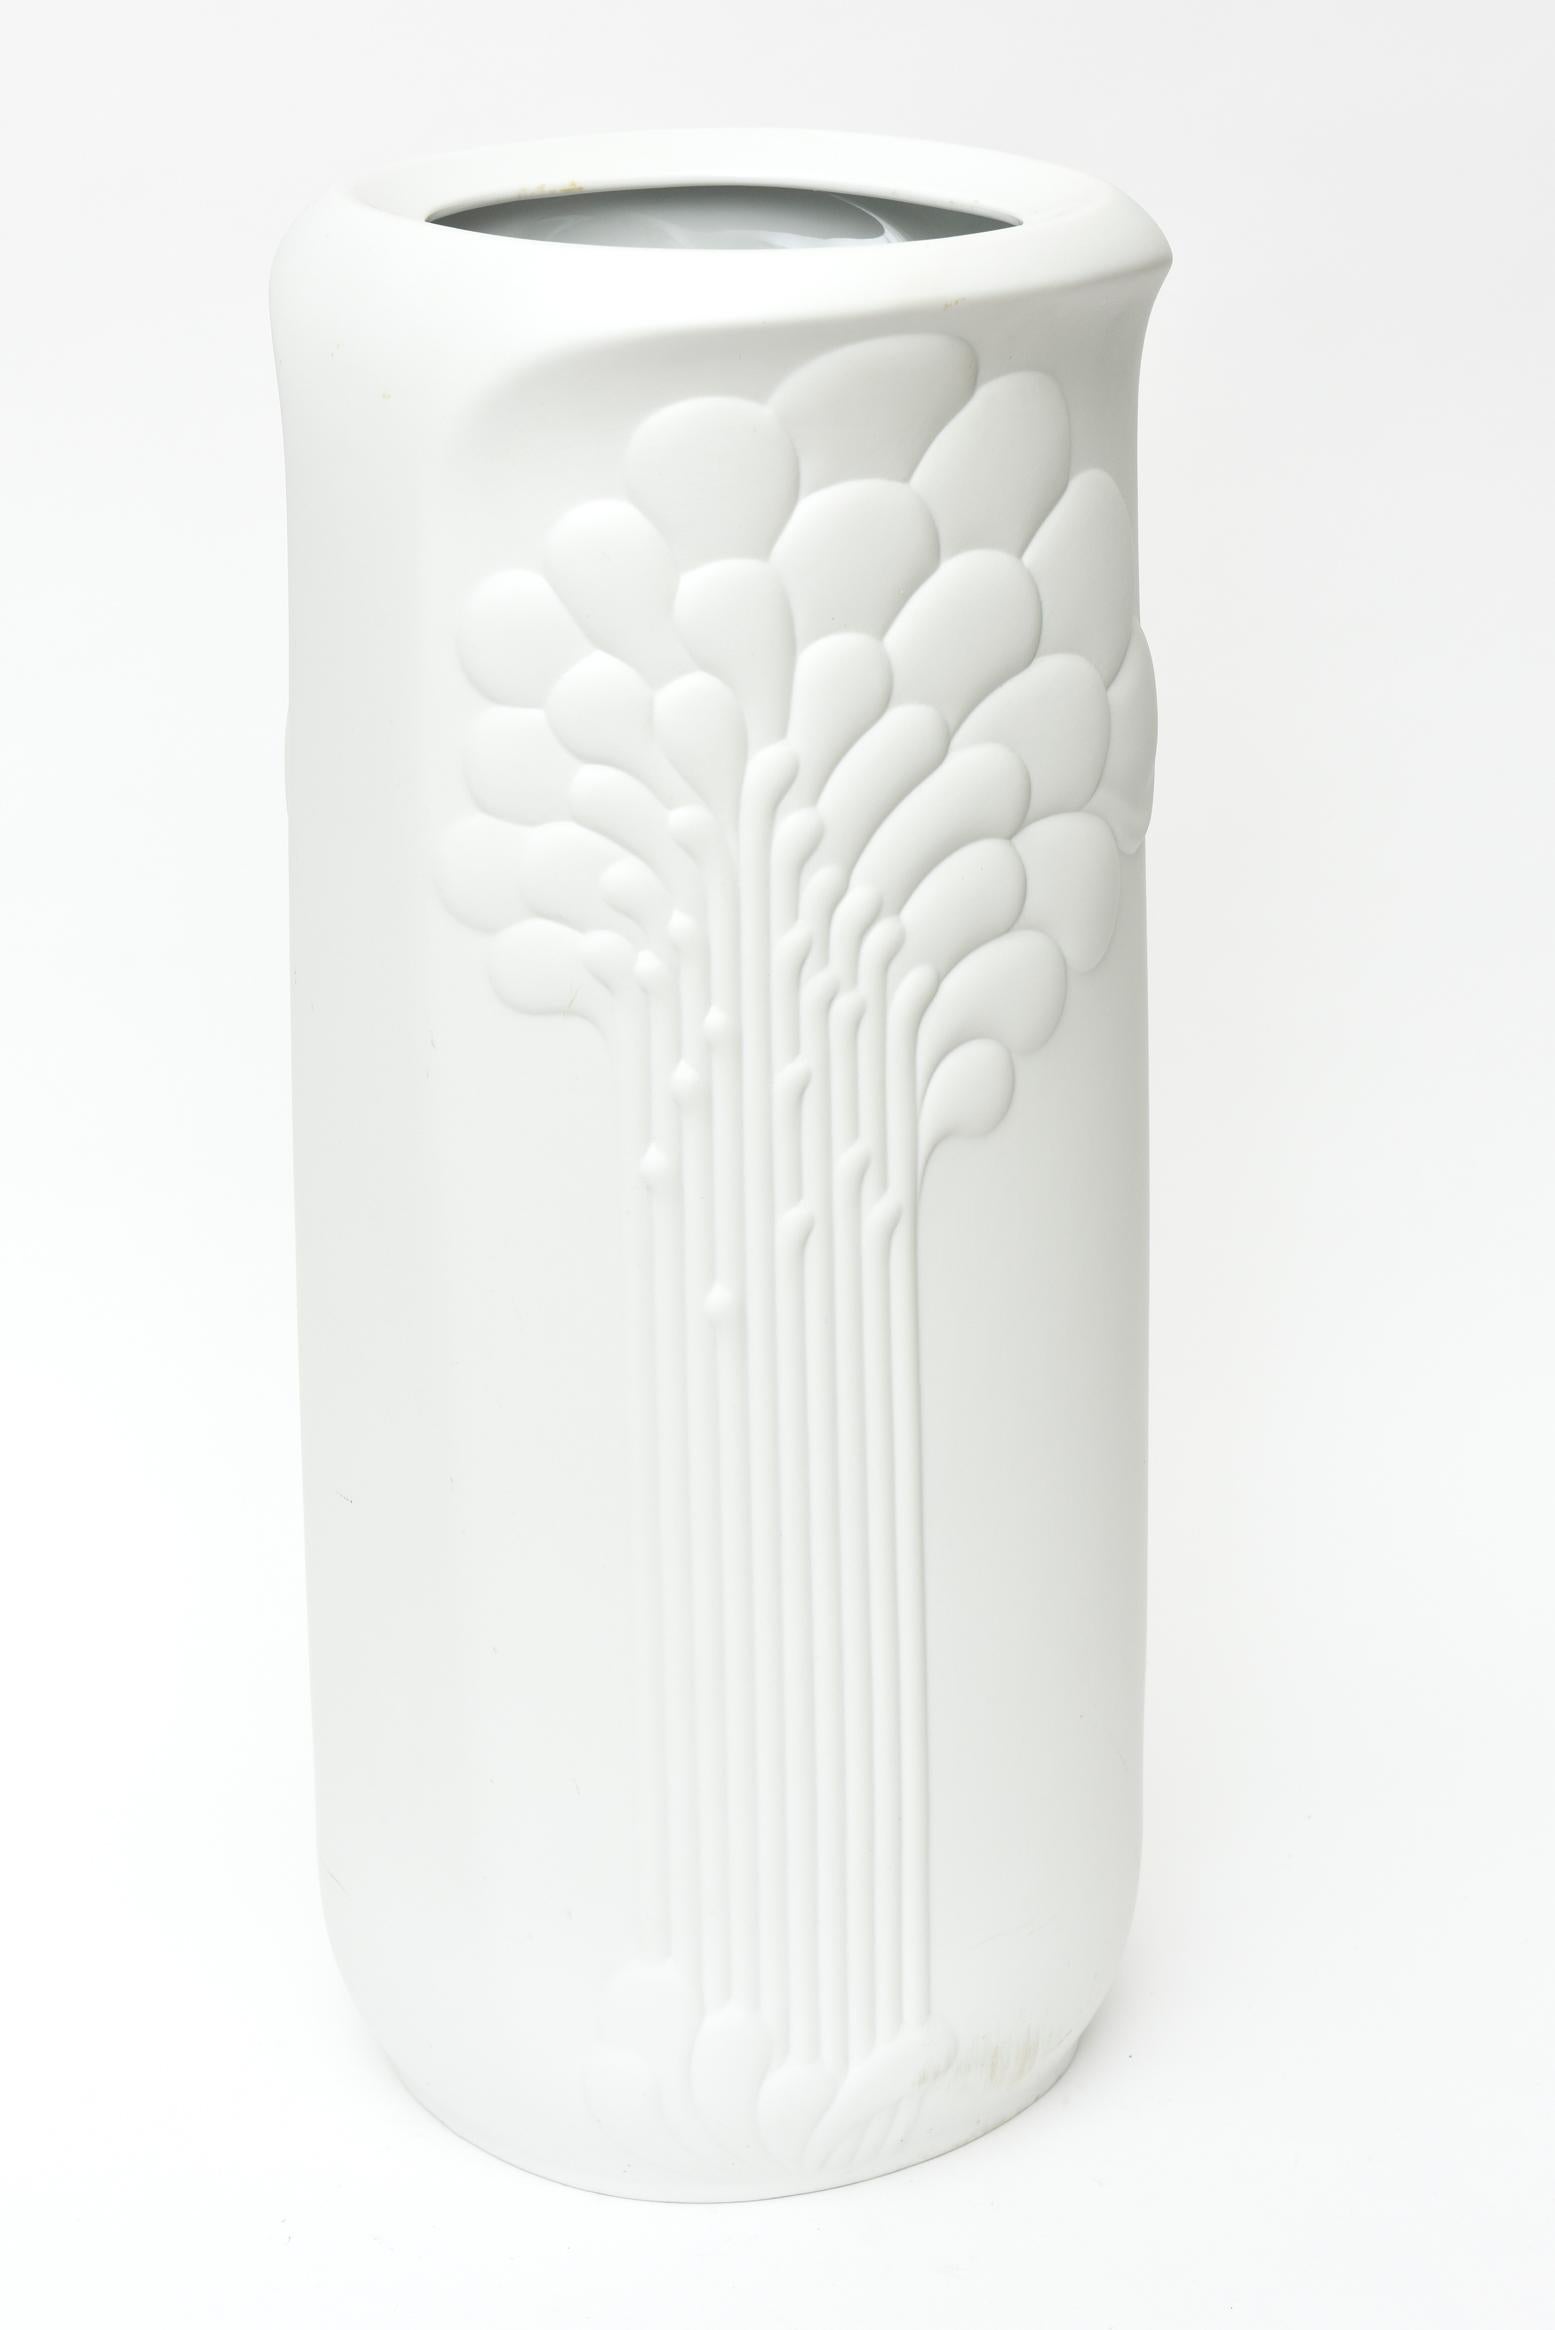 This lovely and monumental white porcelain sculptural Mid-Century Modern signed Kaiser W. Germany is a wonderful umbrella stand and or monumental vase or vessel. It is white matte bisque porcelain with a glazed white porcelain lip. It is from the